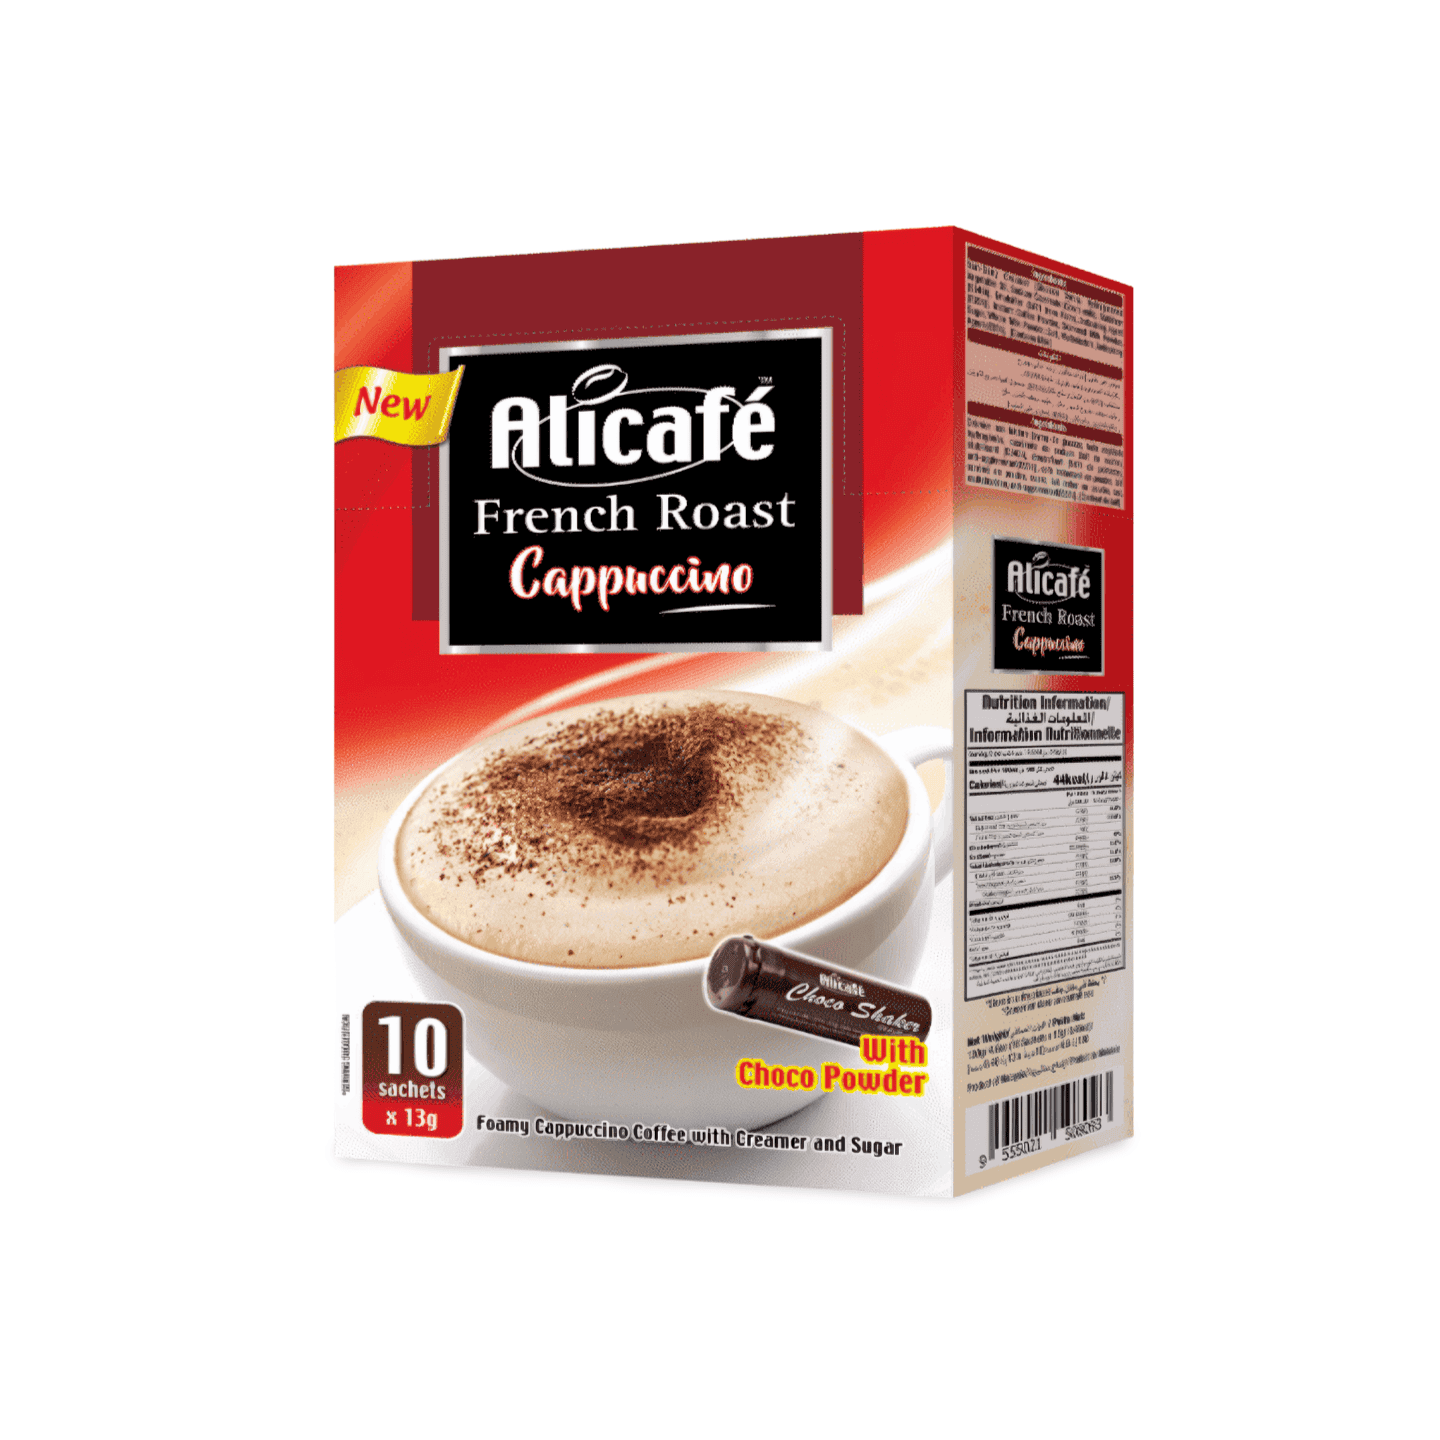 Alicafe French Roast Cappuccino Coffee